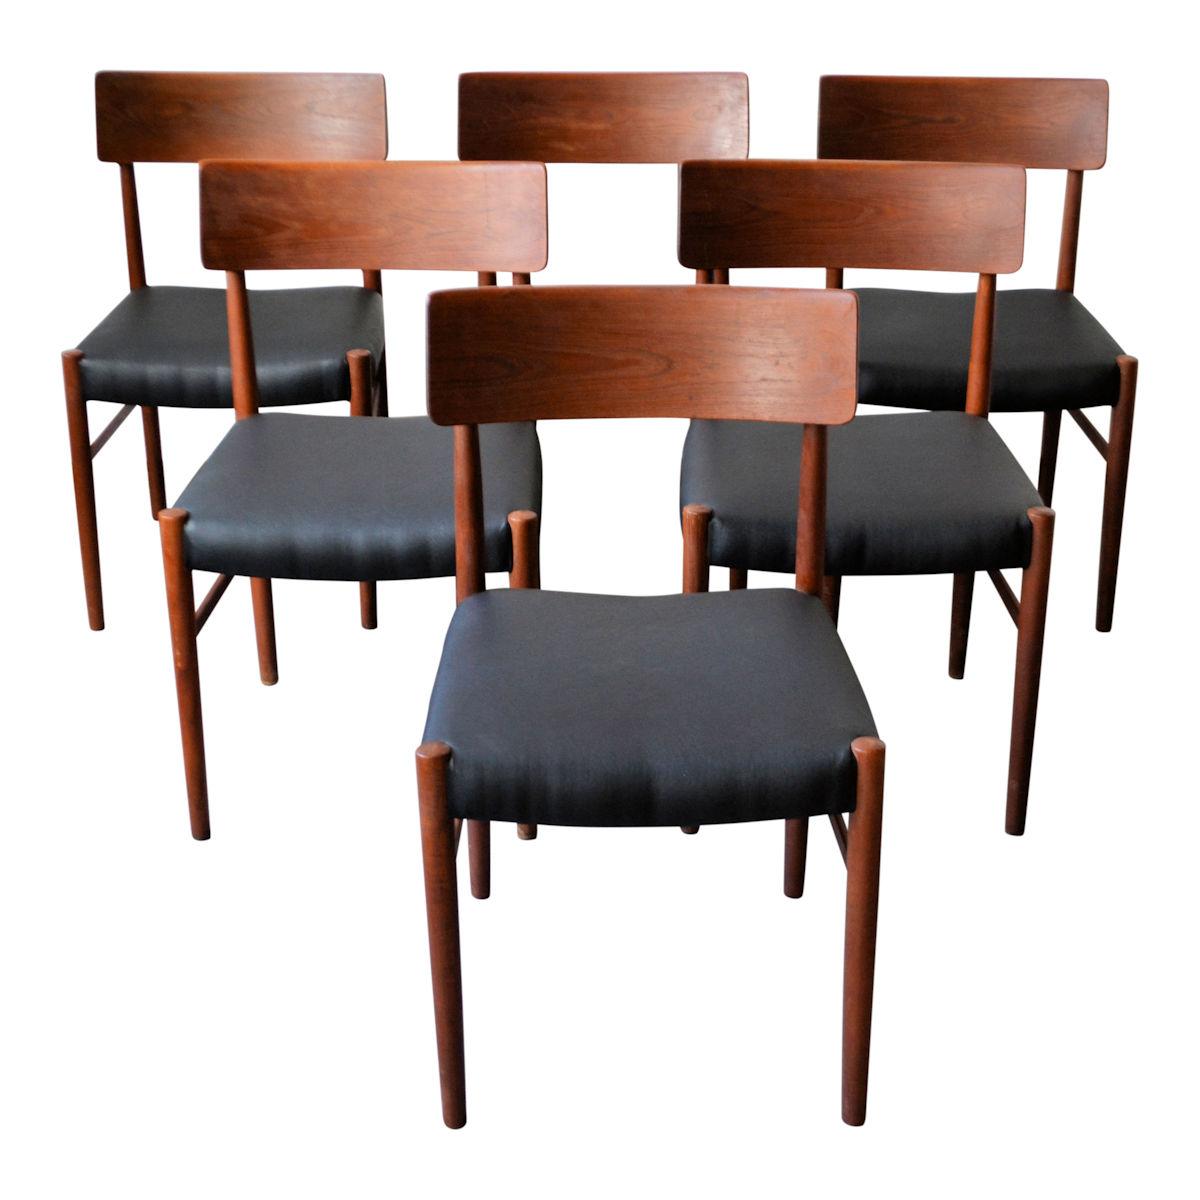 Set of six vintage Danish design dining chairs produced by Farstrup. These teak and beech chairs have a characteristic functional design, solid frames, and new black Skai leather upholstery. Gorgeous high-quality design pieces that will make a